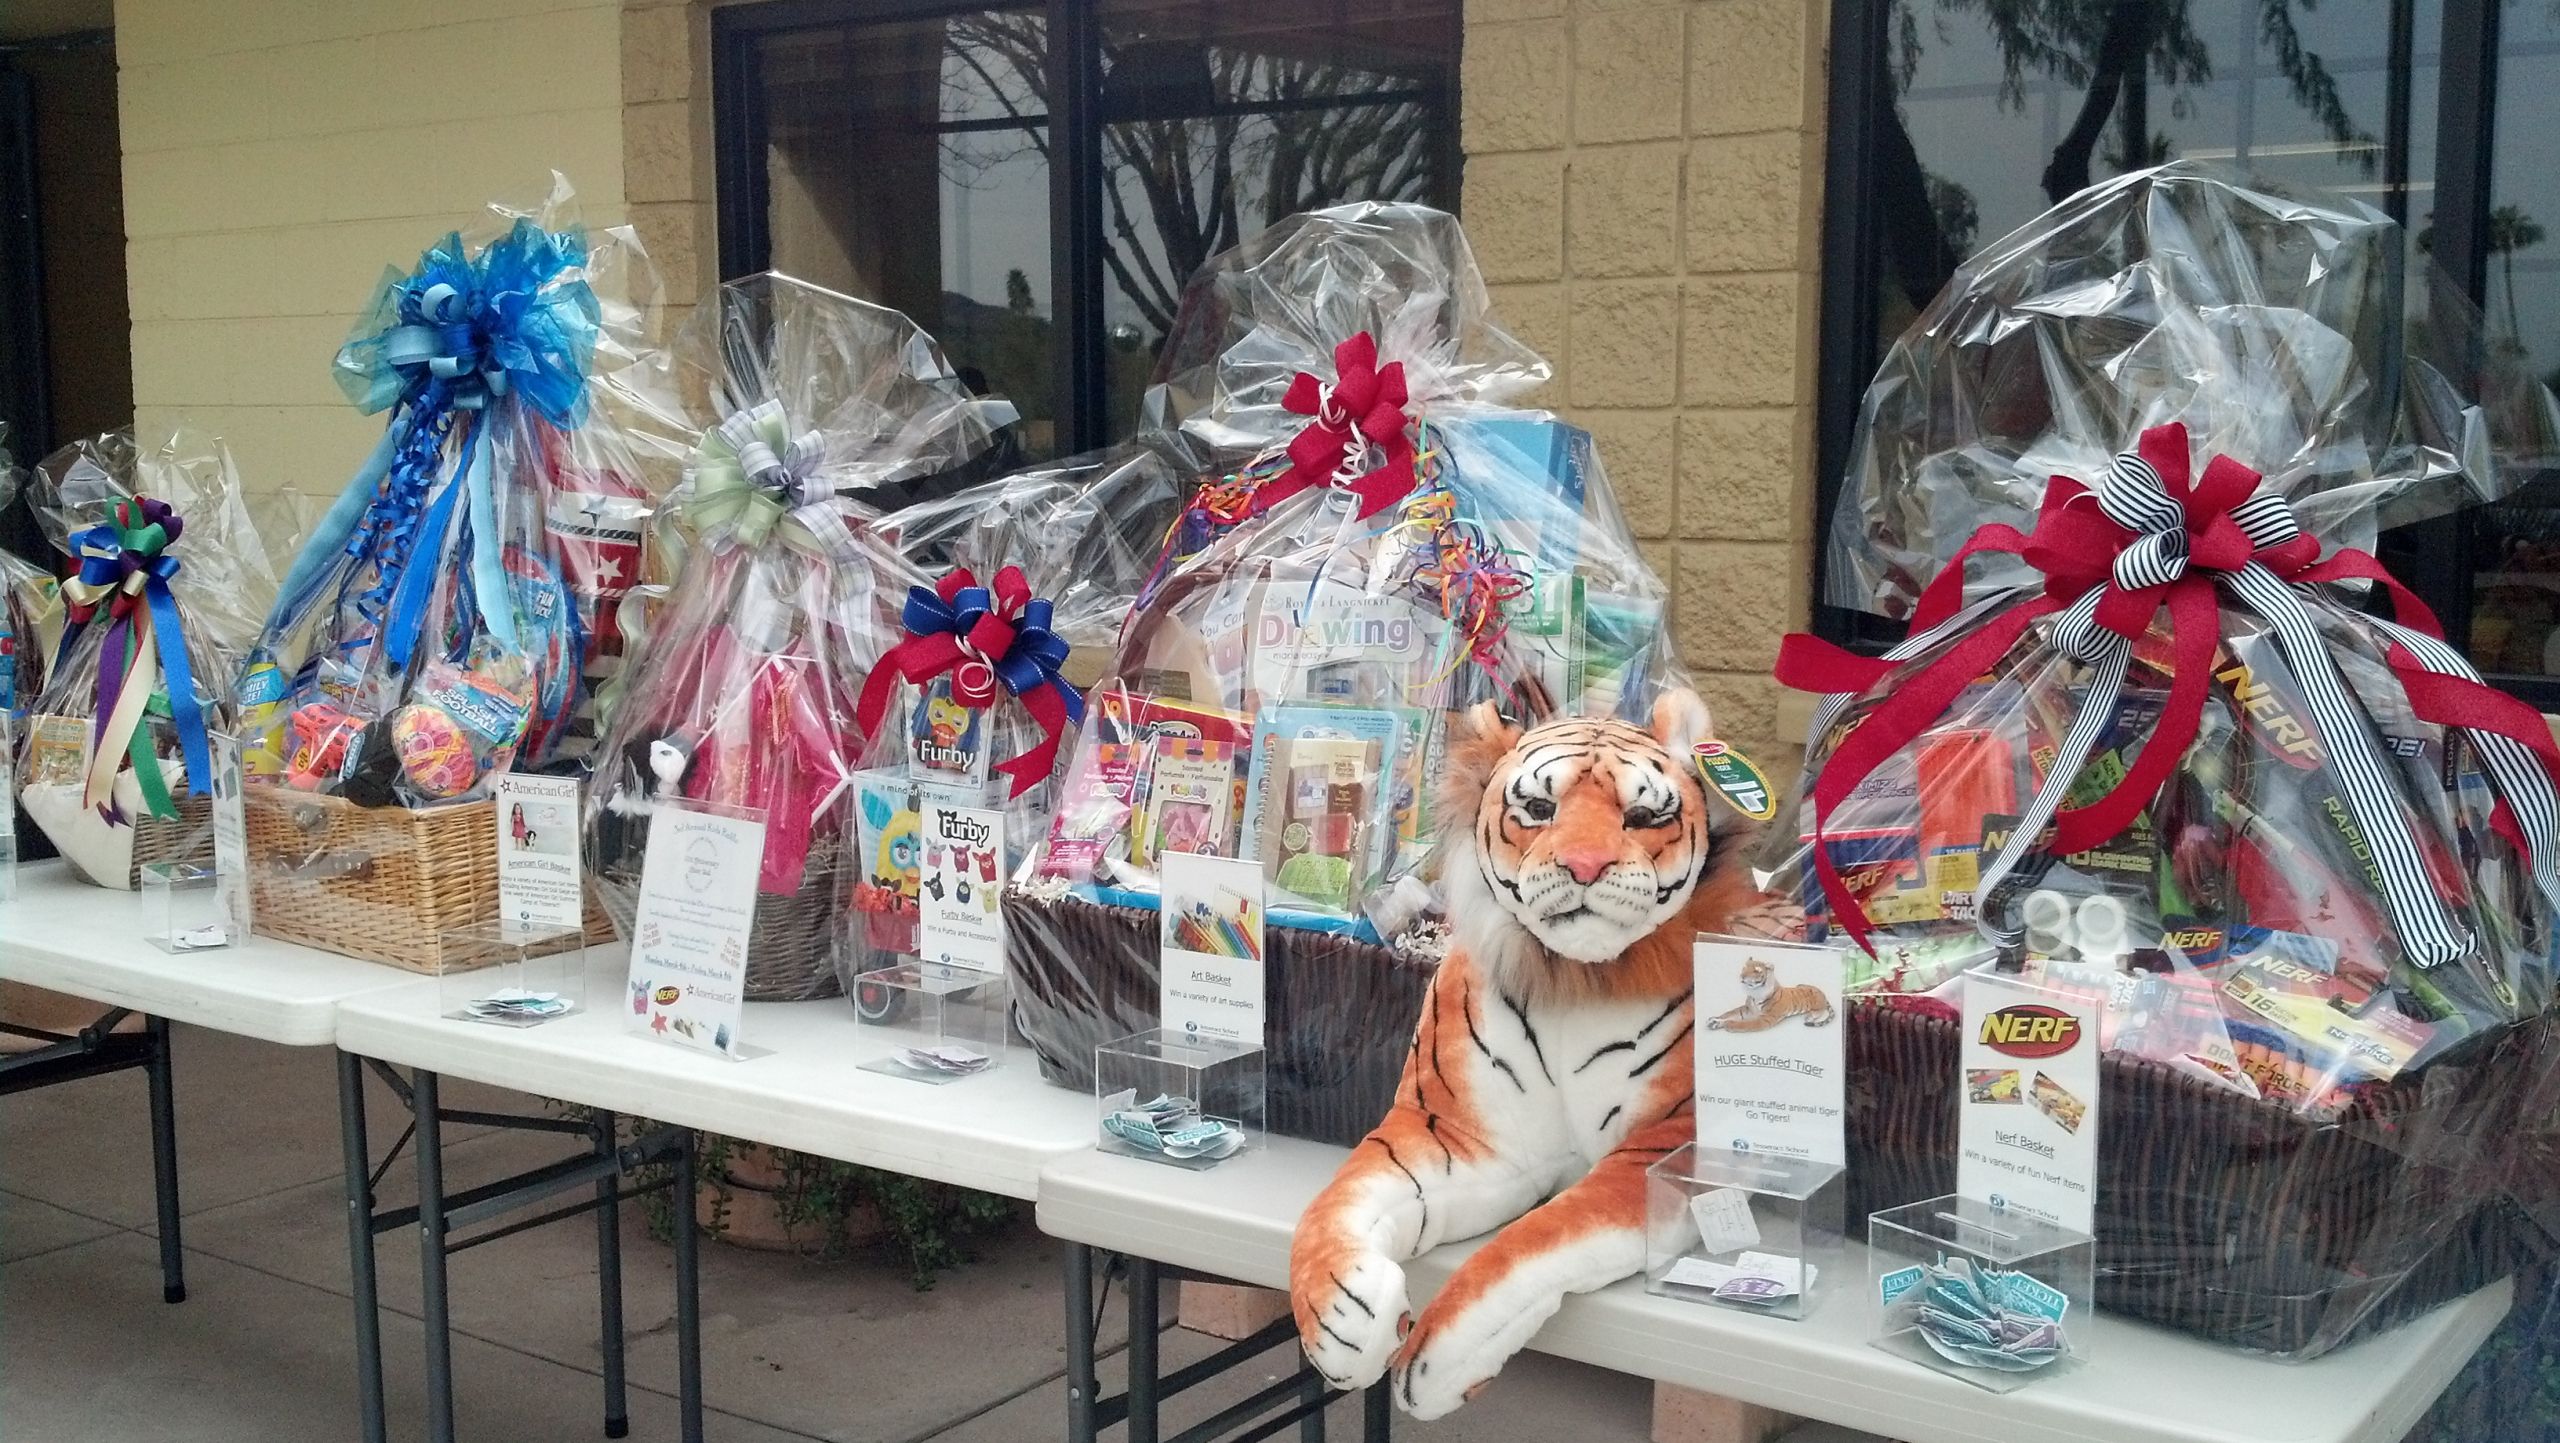 Gift Baskets Ideas For Raffles
 Special Event and Silent Auction Gift Basket Ideas by M R